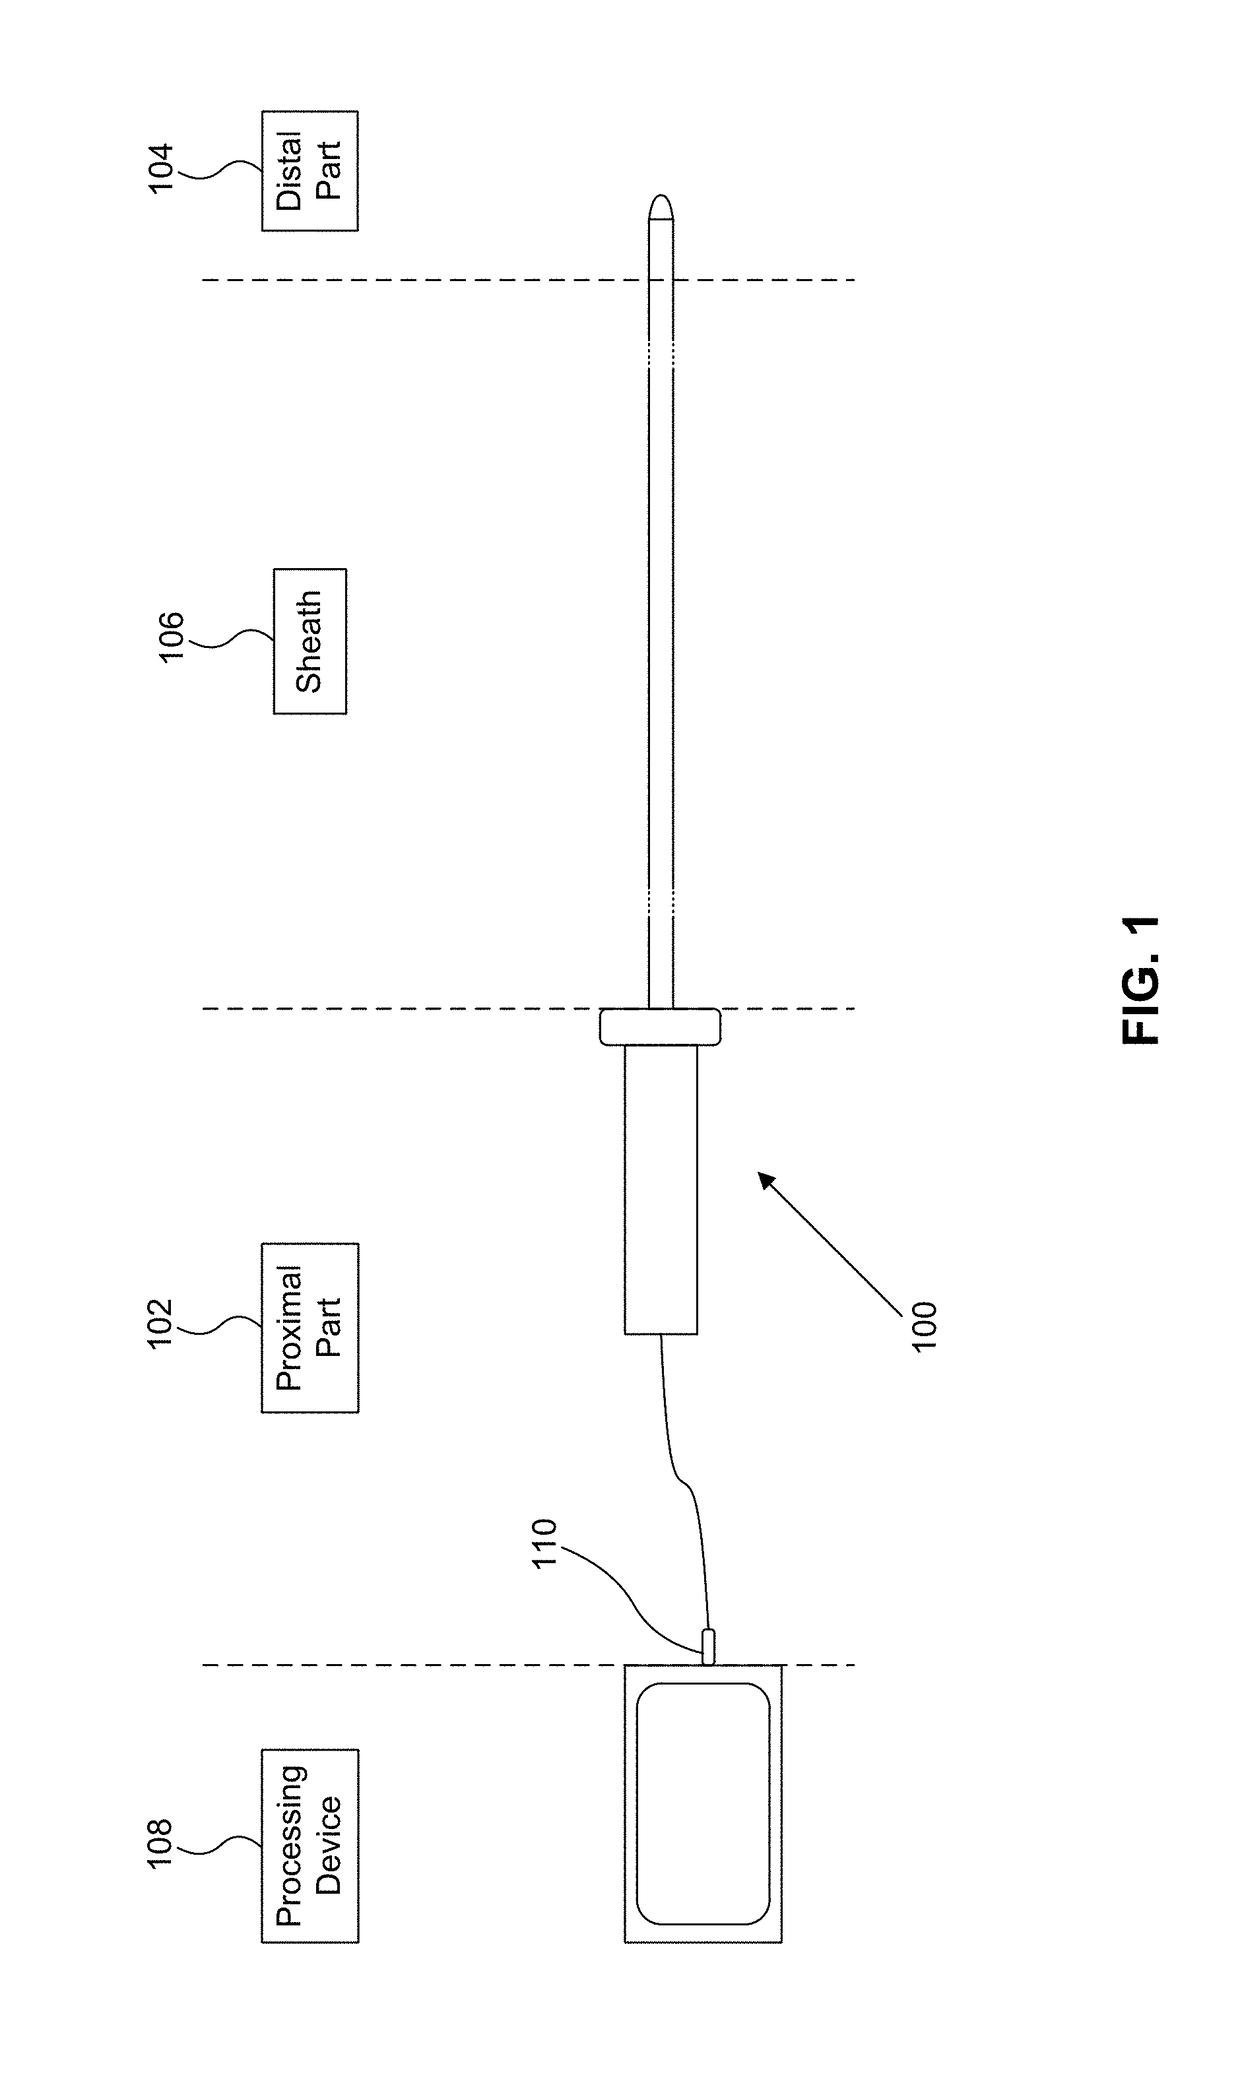 Radiofrequency ablation catheter with optical tissue evaluation